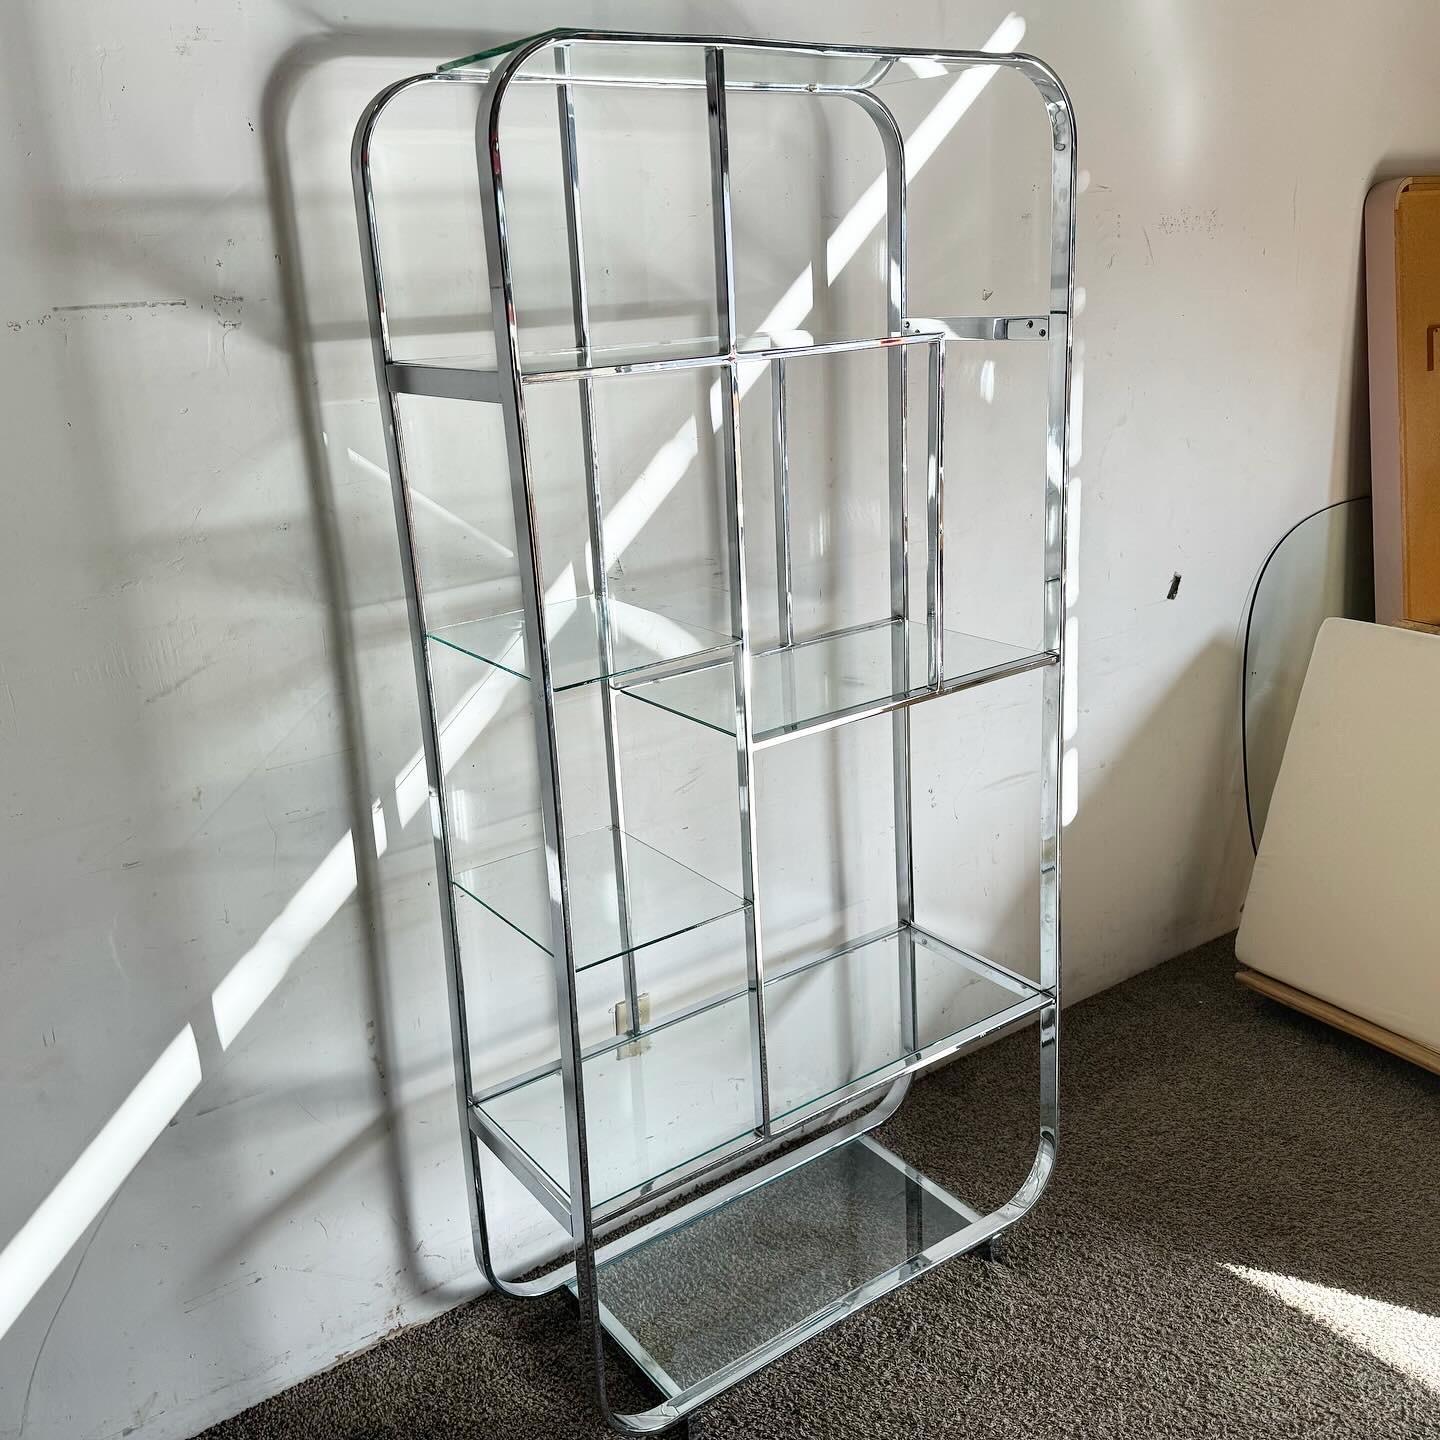 Elevate your decor with the Chrome Glass Etagere DIA, a Mid Century Modern masterpiece. This etagere combines a minimalist chrome frame with clear glass shelves, perfect for displaying books and collectibles. It embodies the sleek, clean lines of